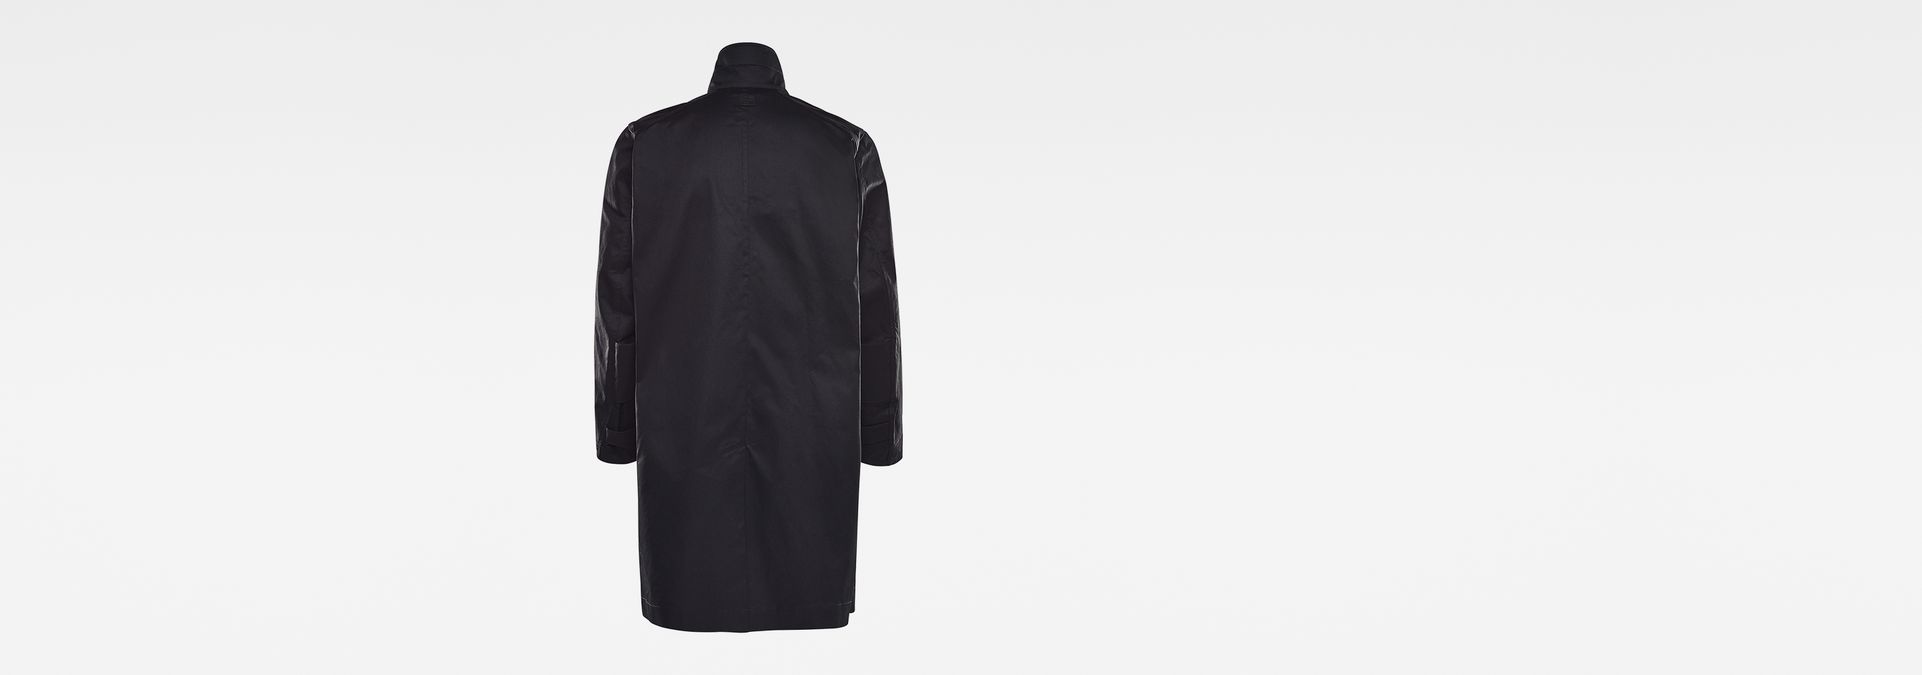 GSRR 2 in 1 Trench Coat | Black | G-Star RAW®